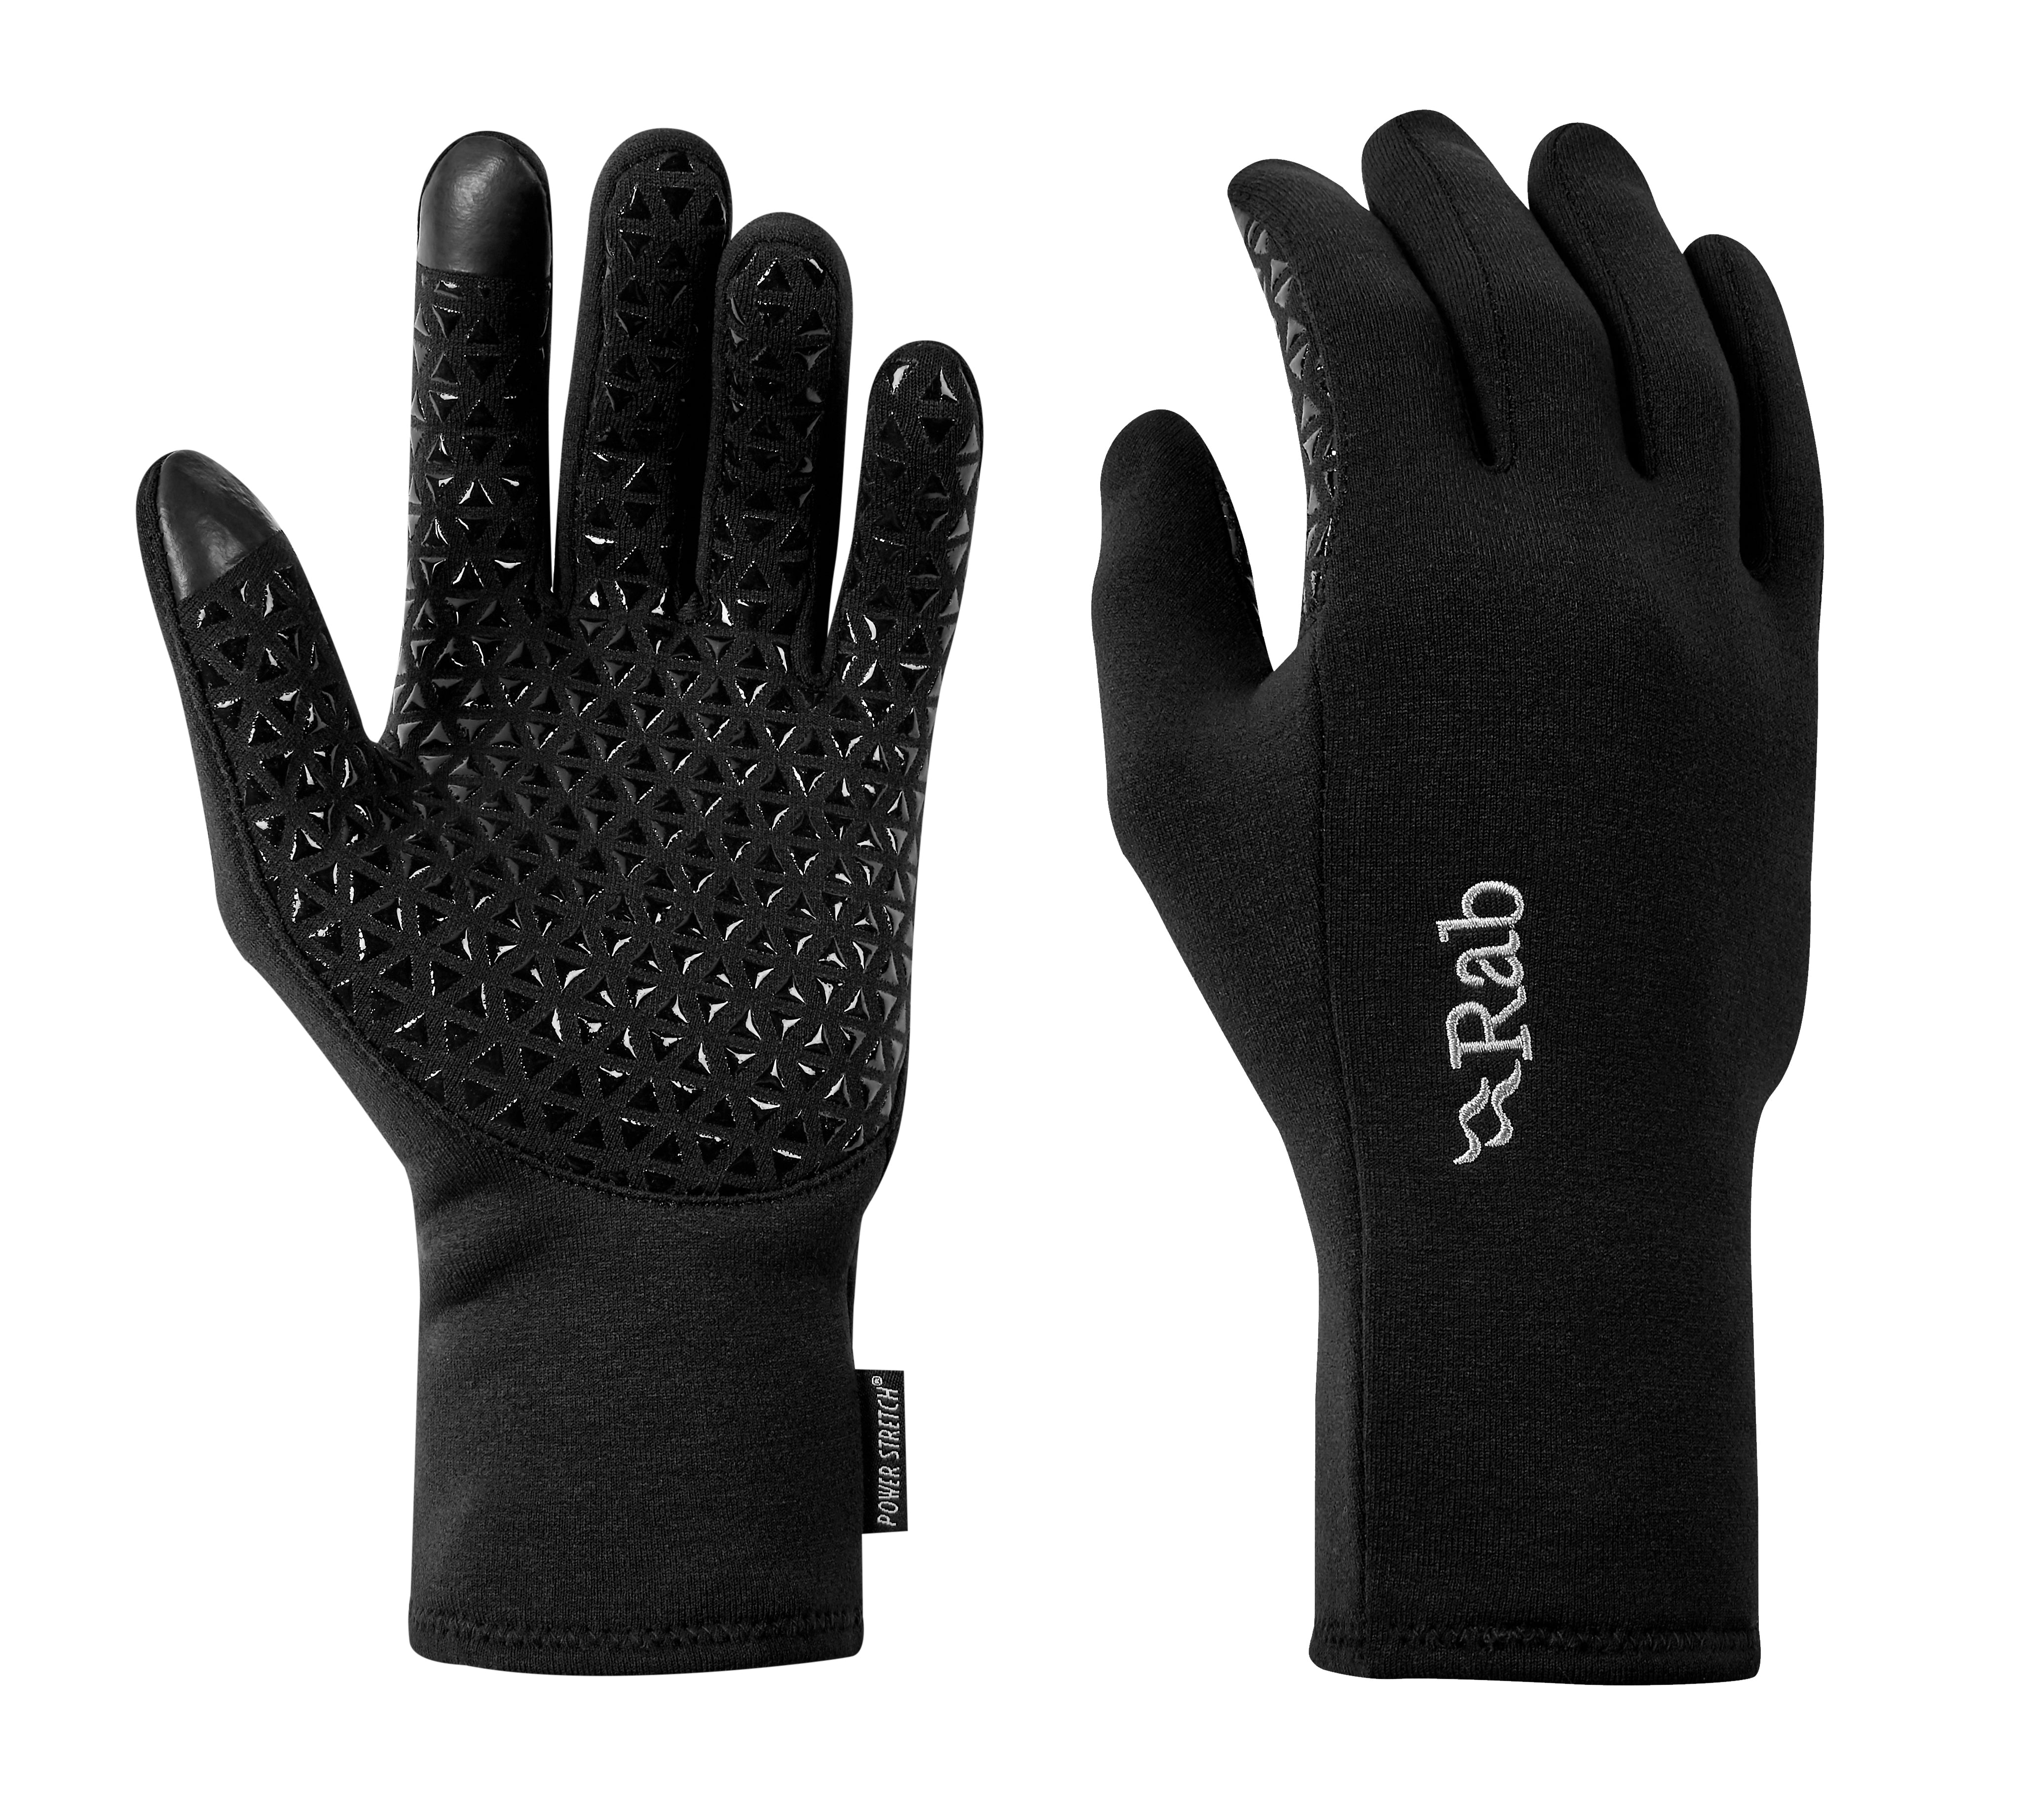 Rab Men's Power Stretch Contact Grip Glove - Outfitters Store